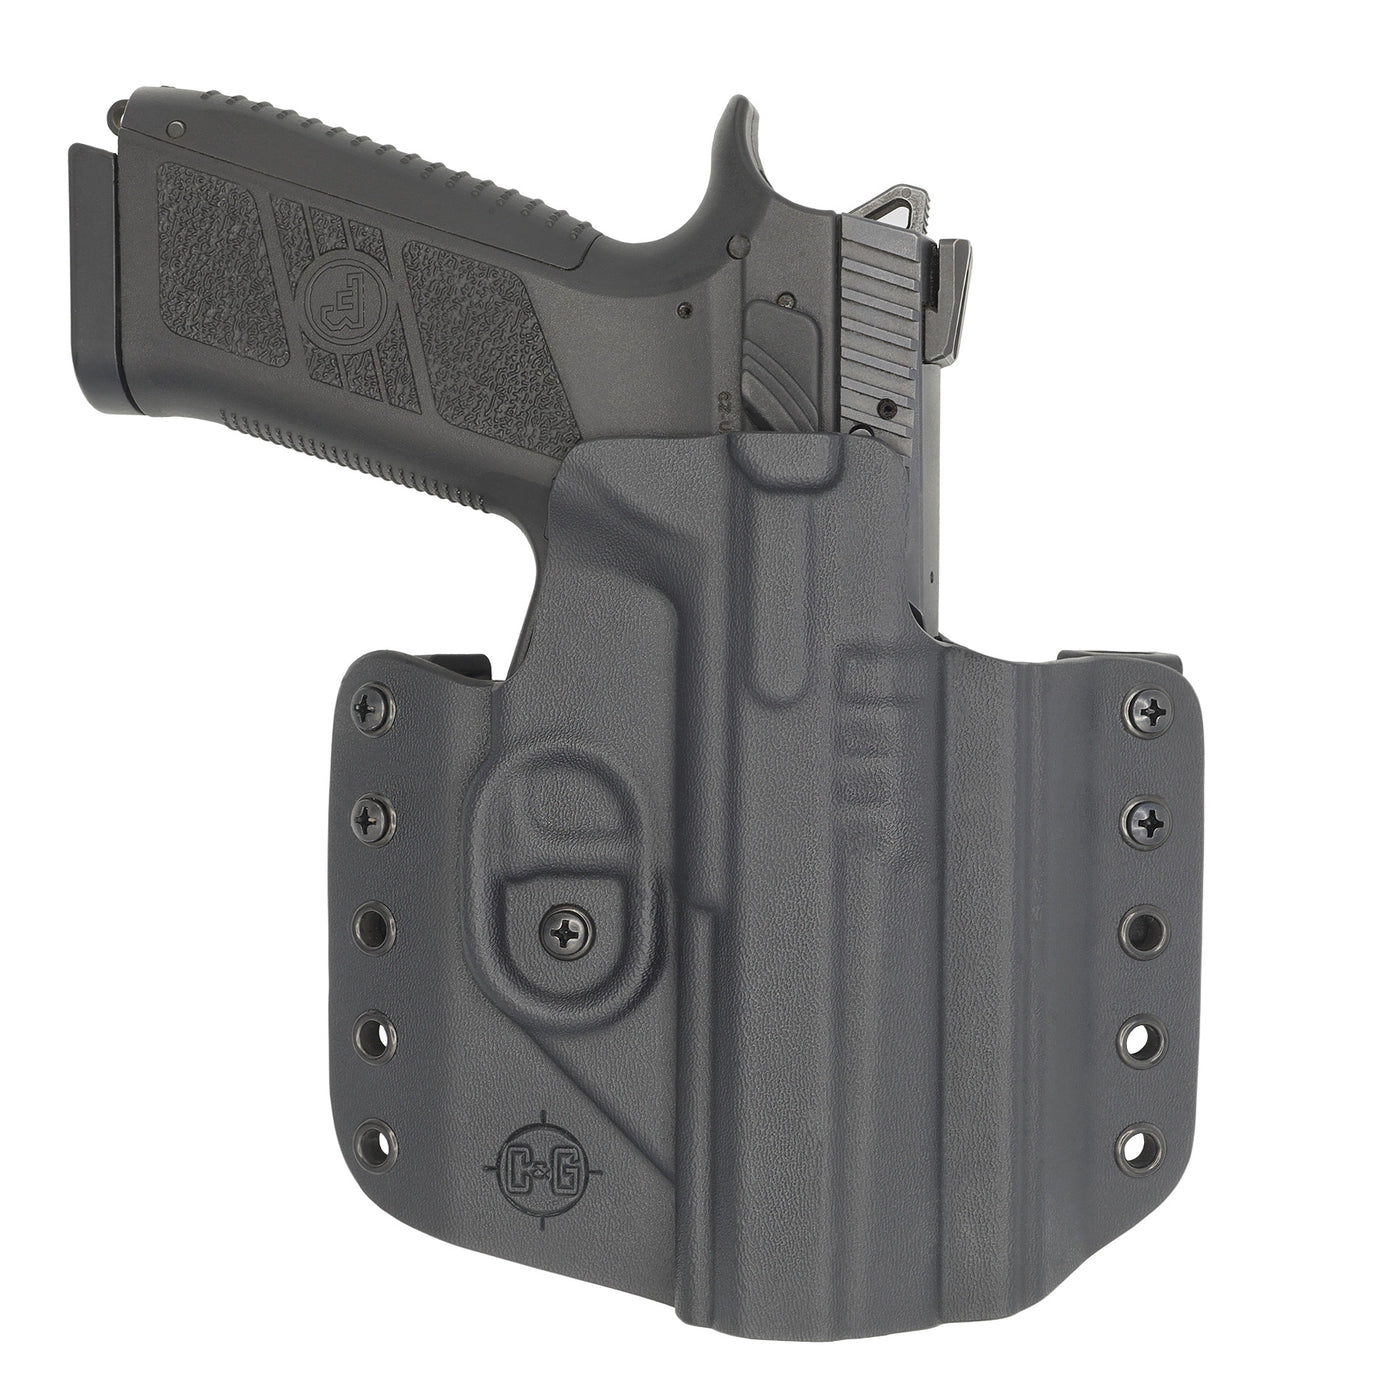 C&G Holsters Quickship OWB covert CZ P07 in holstered position